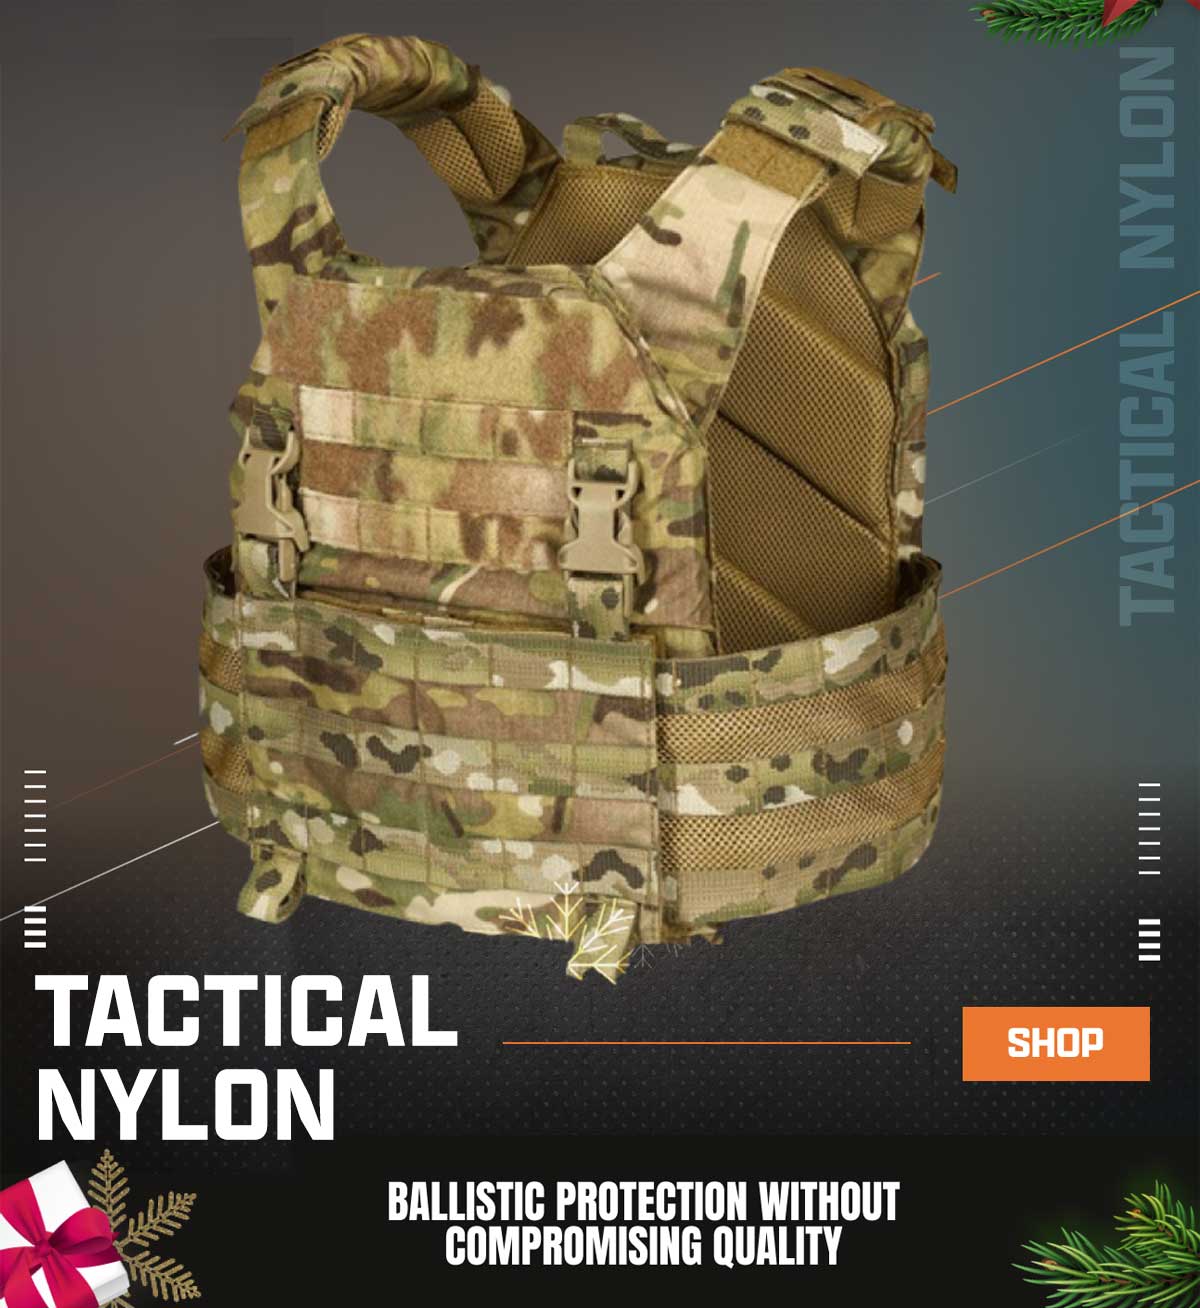 Tactical Gear & Armor • Rated #1 for MIL/LE • Chase Tactical